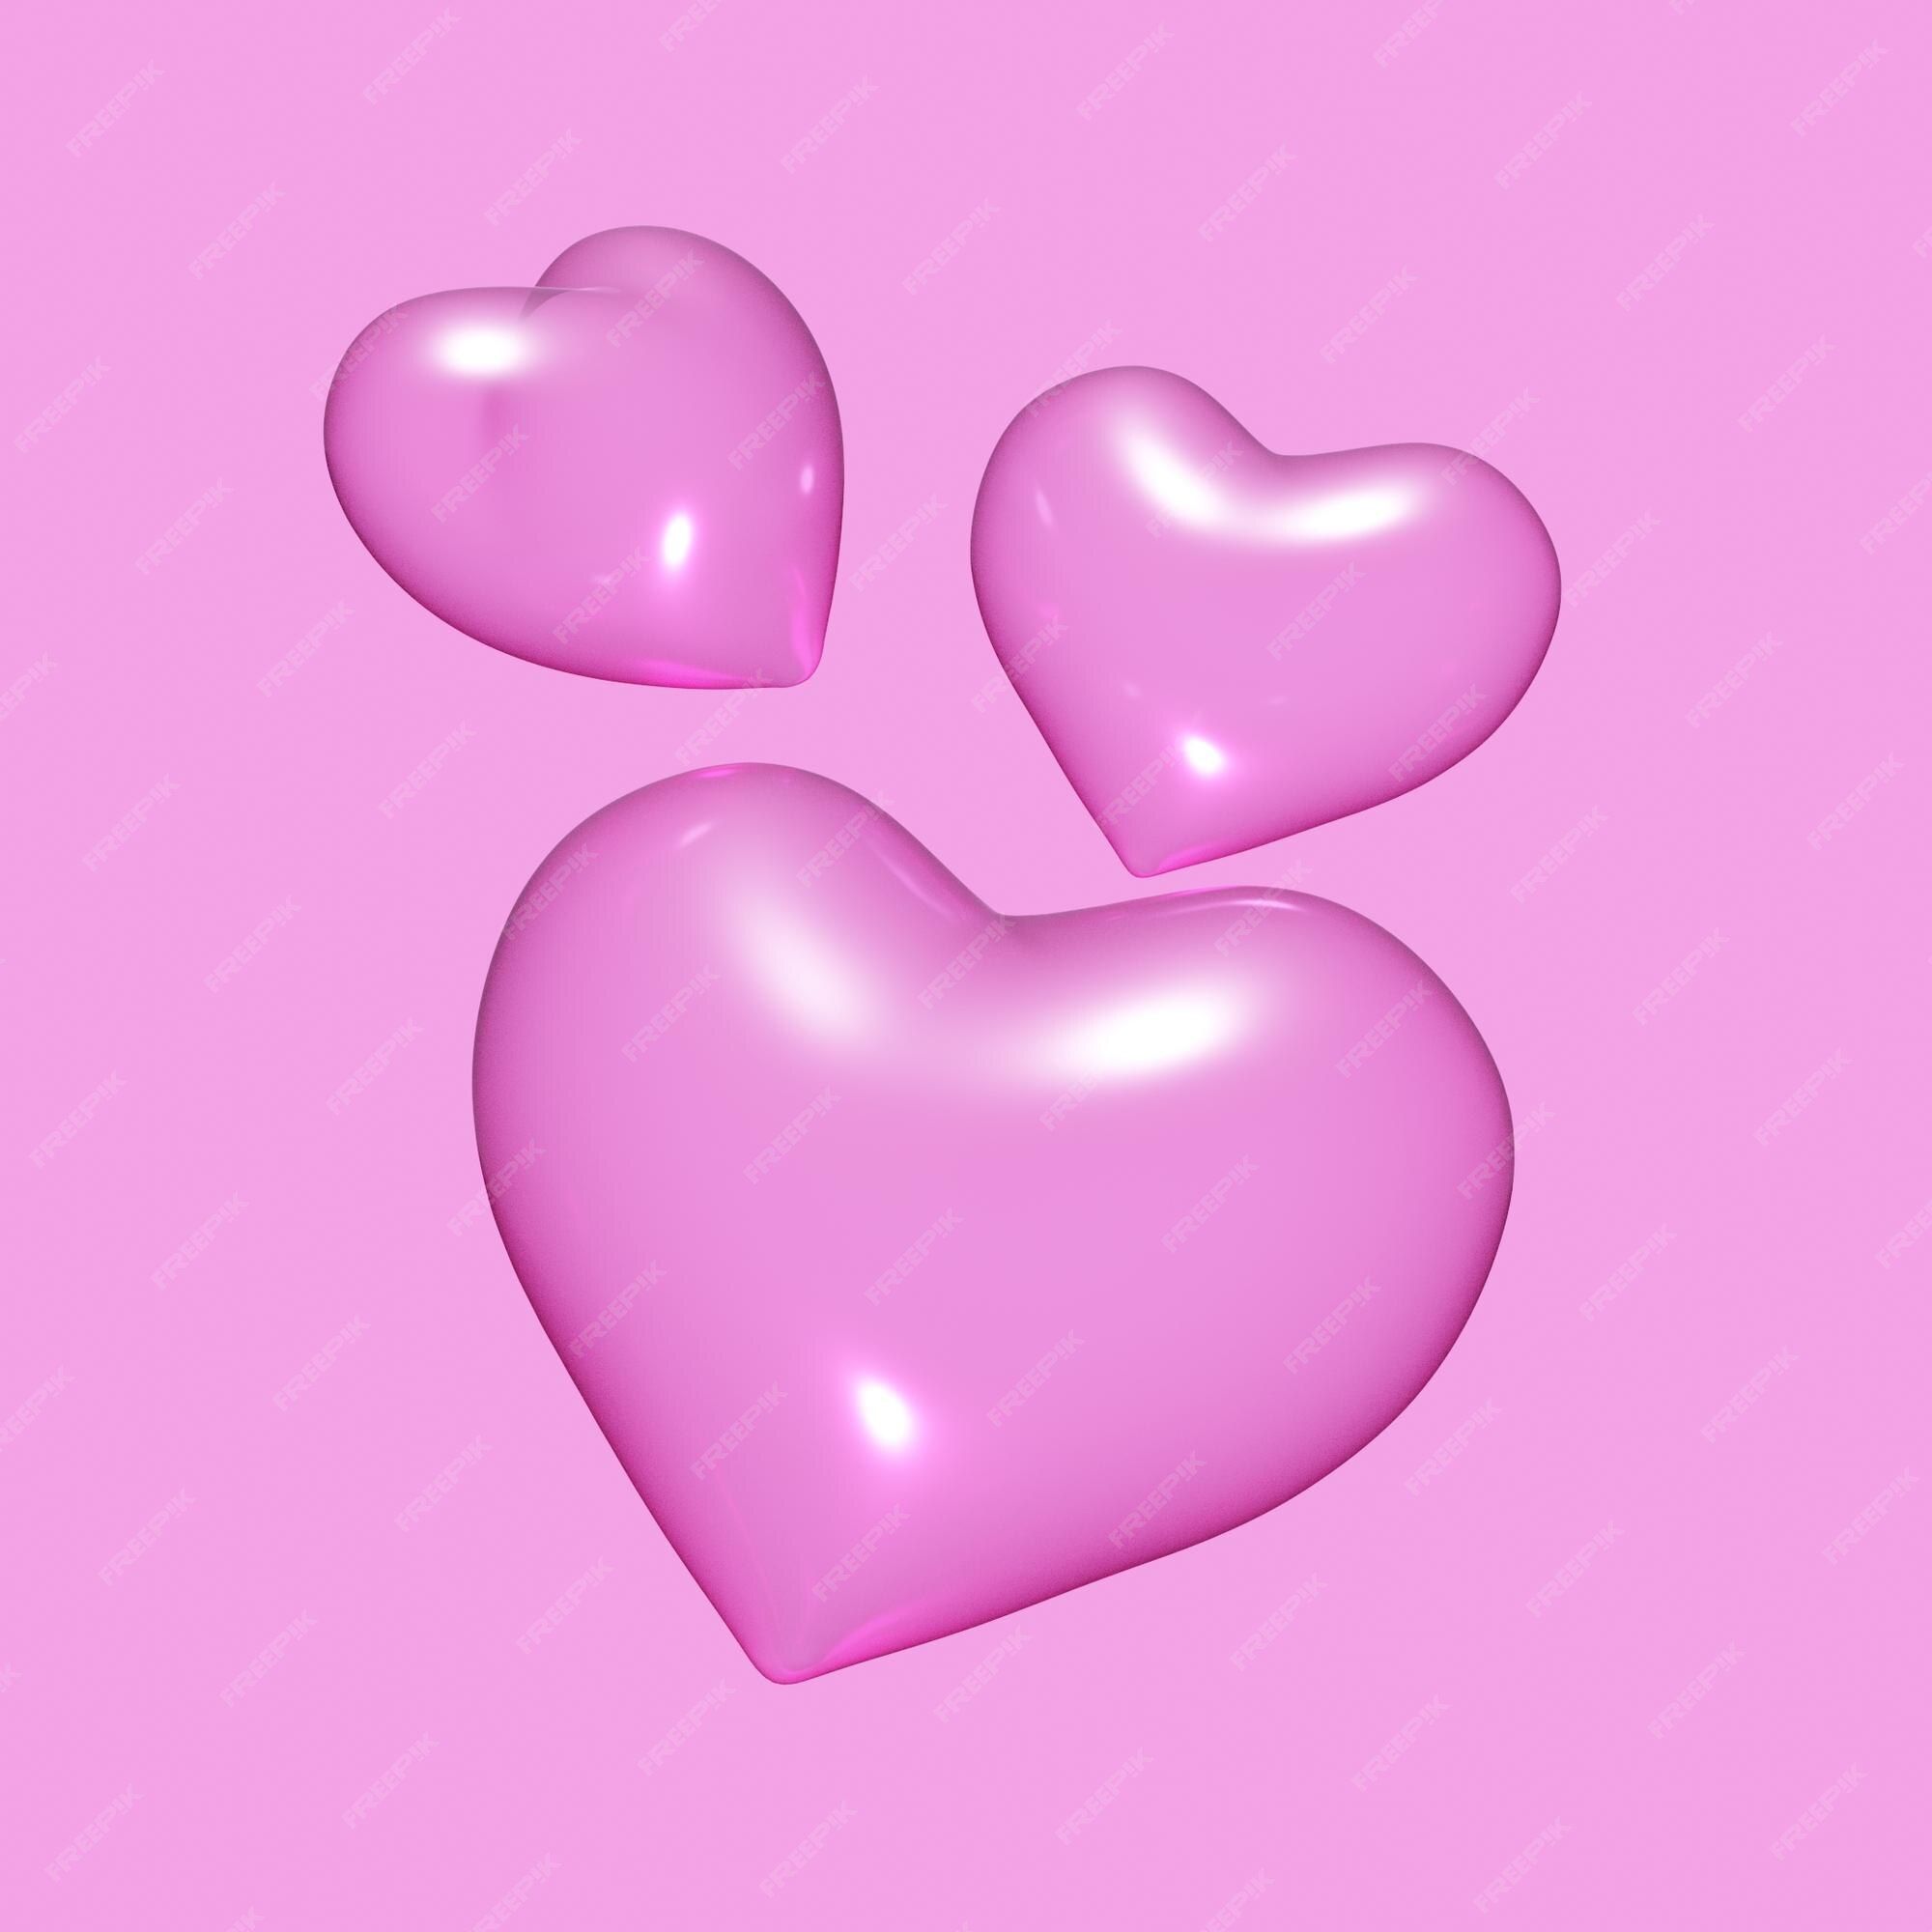 3D hearts on a pink background - Pink heart